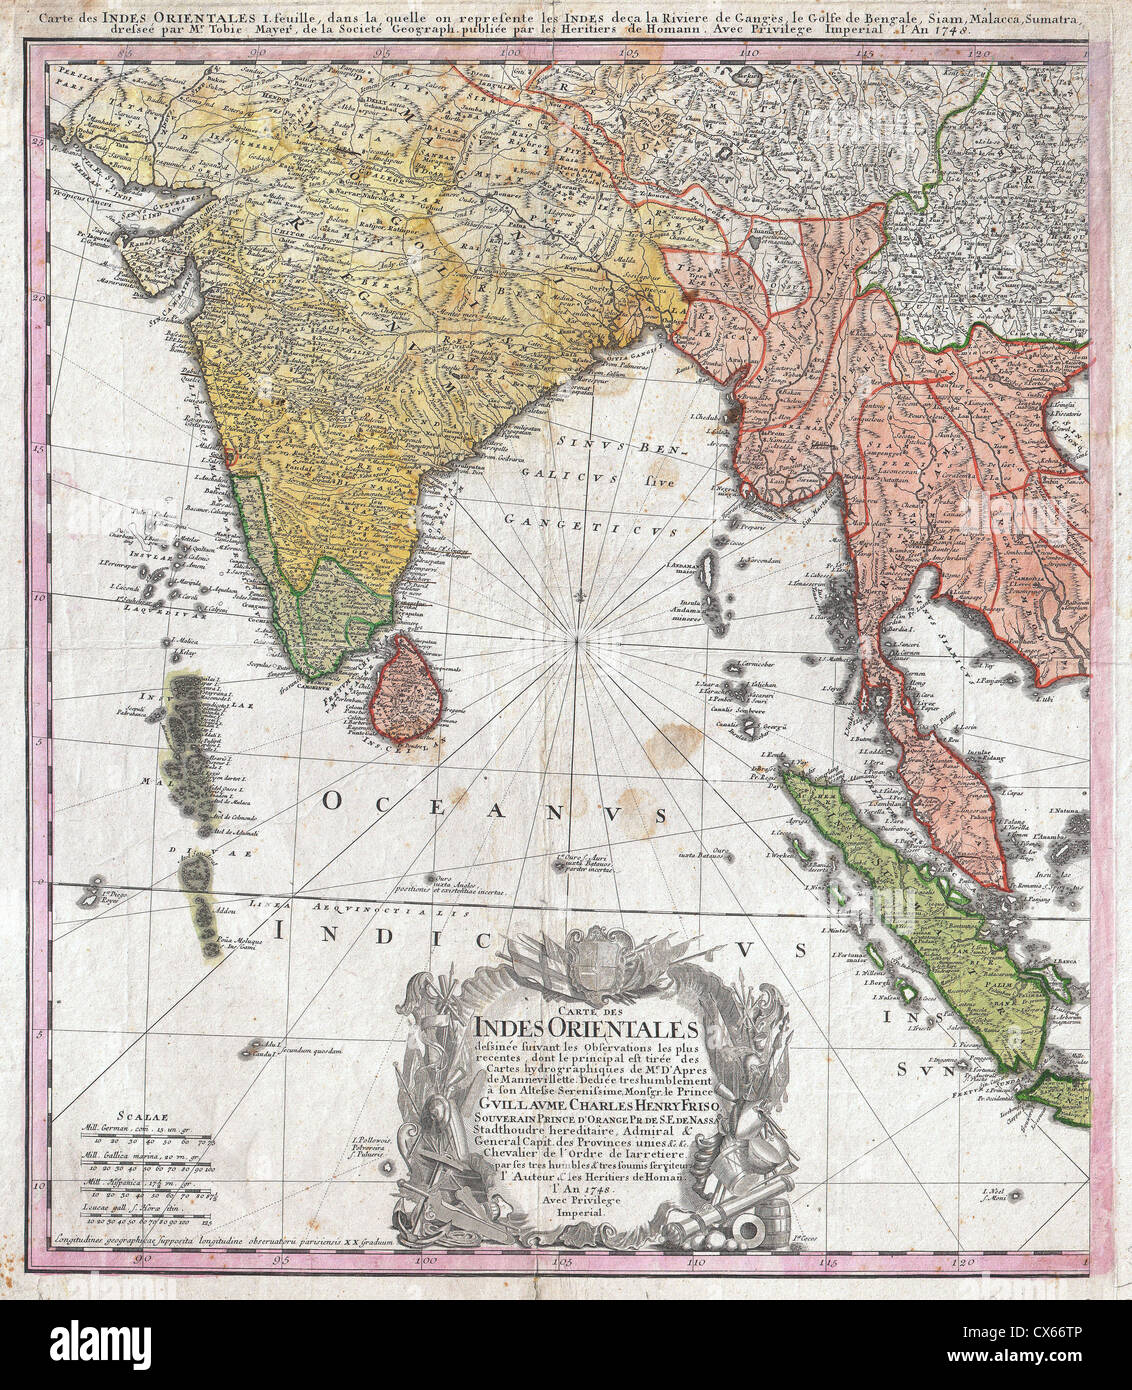 1748 Homann Heirs Map of India and Southeast Asia Stock Photo